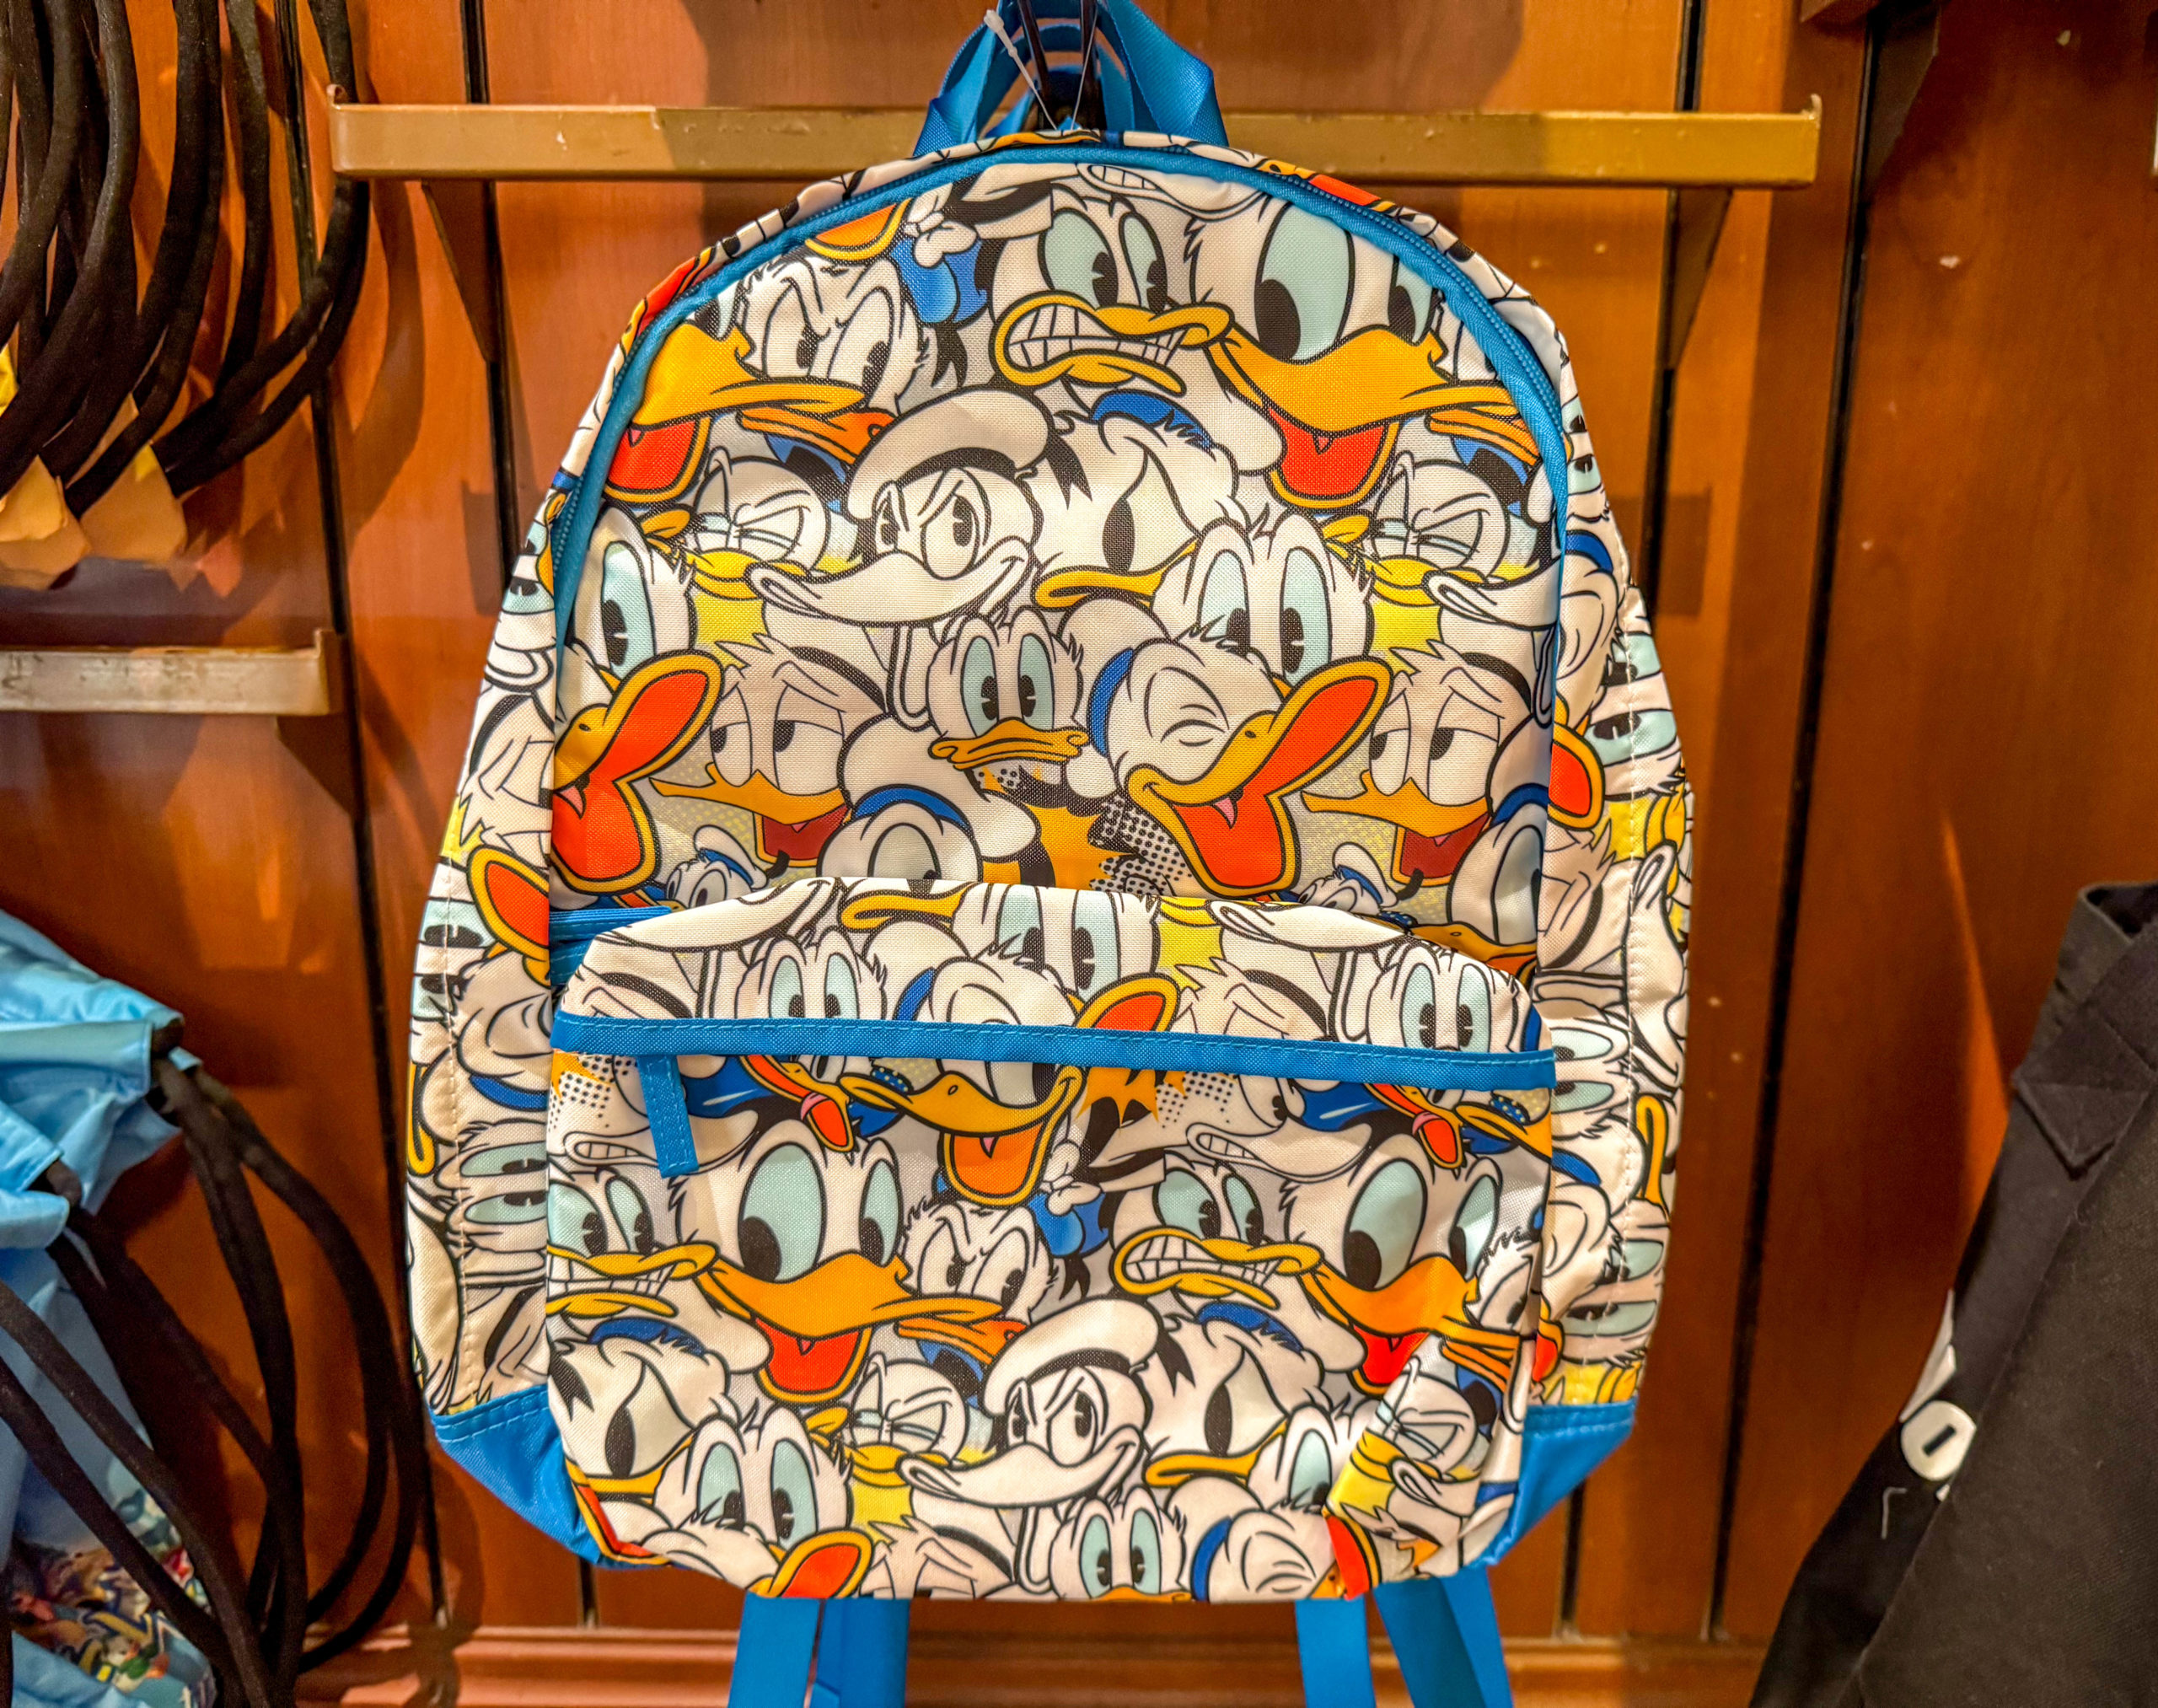 Donald Duck Backpack